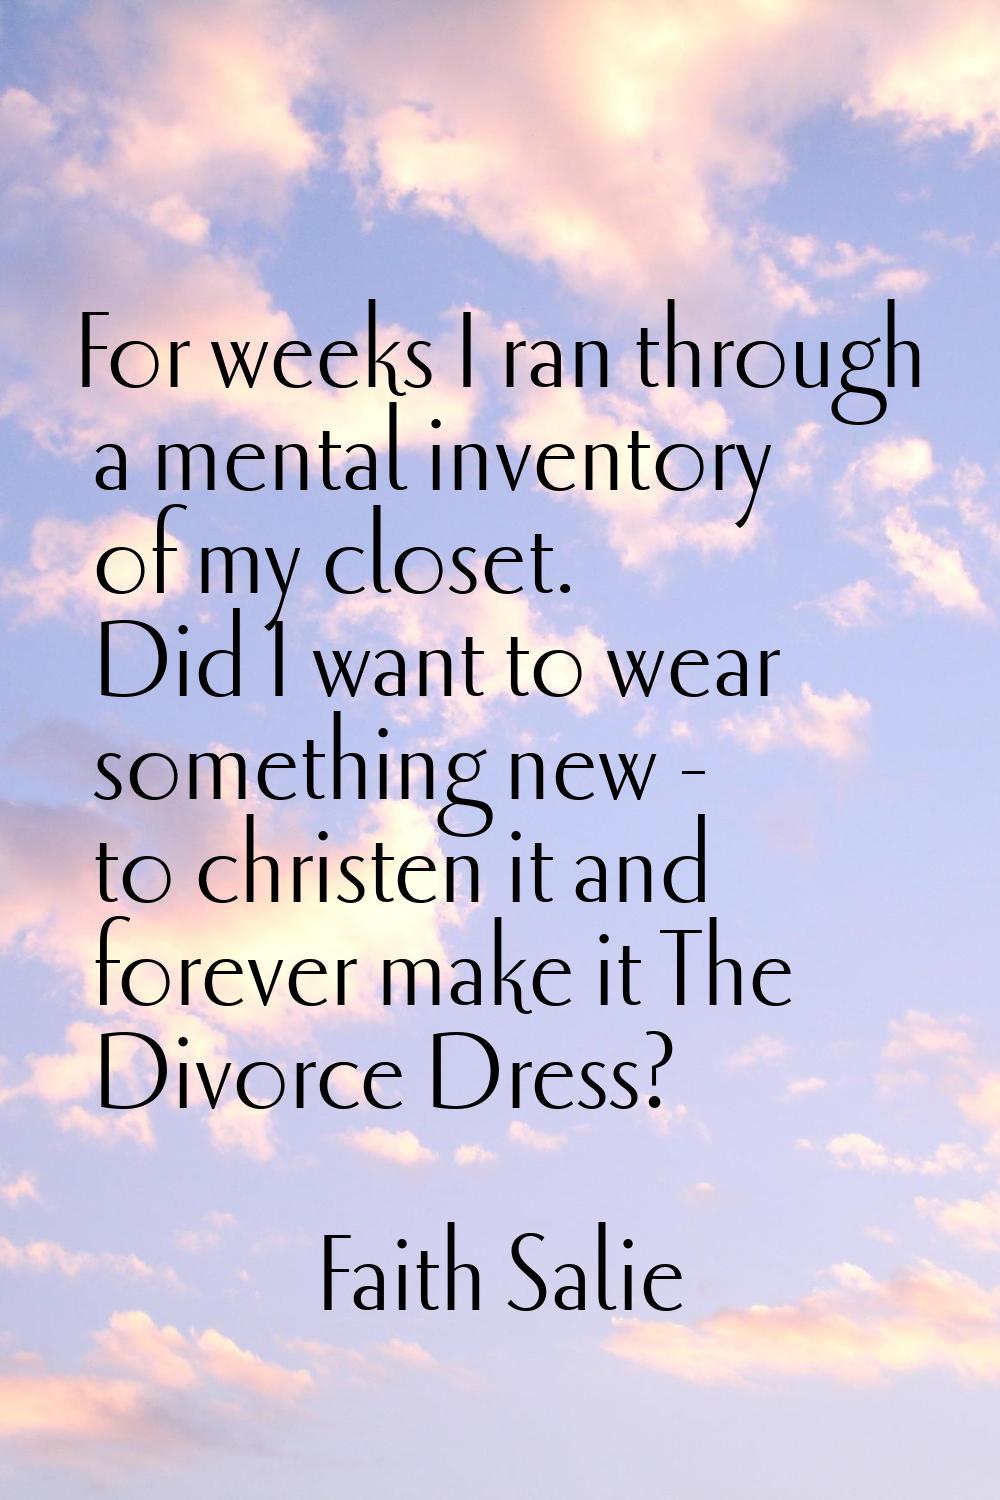 For weeks I ran through a mental inventory of my closet. Did I want to wear something new - to chri